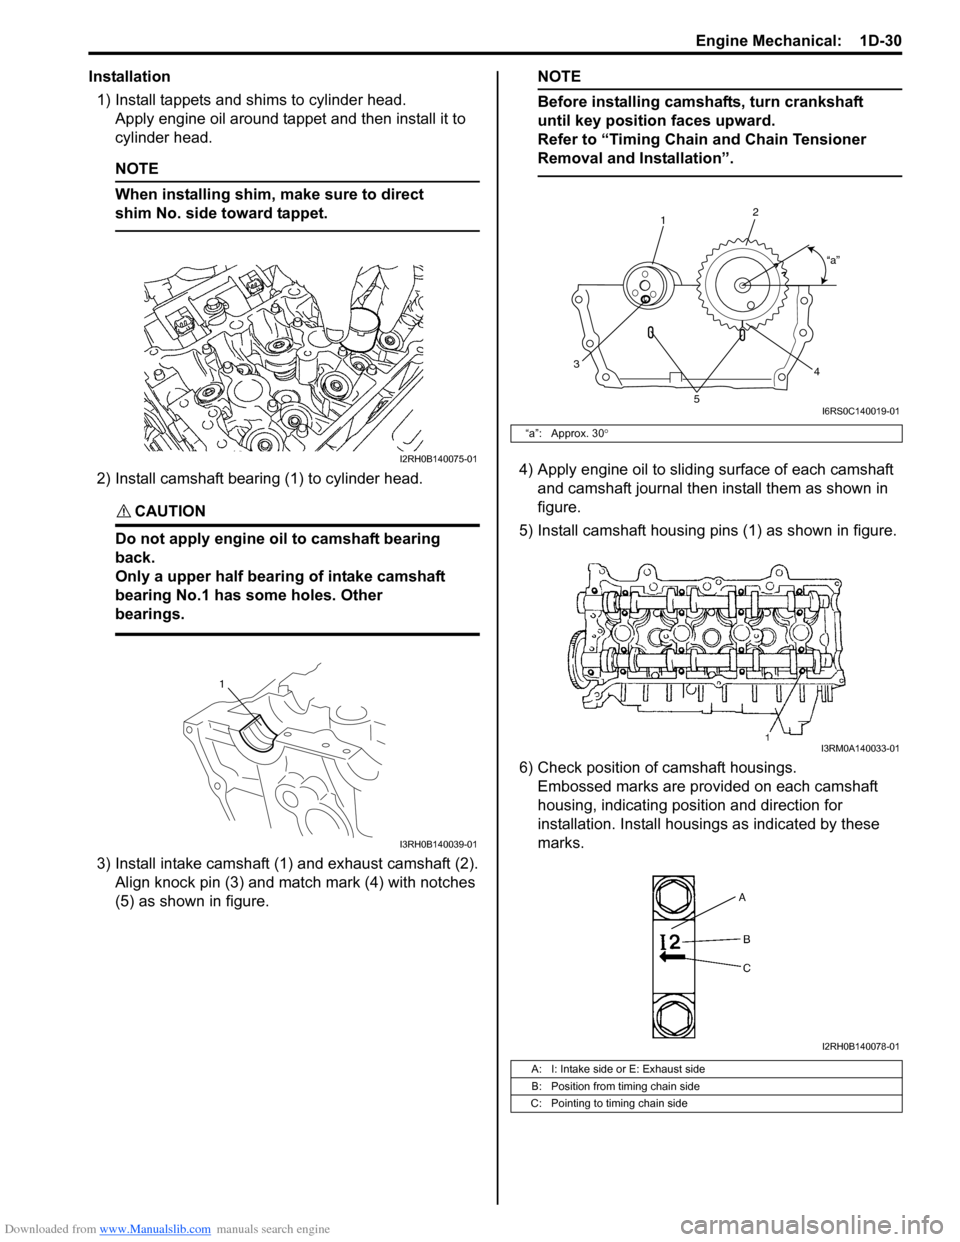 SUZUKI SWIFT 2007 2.G Service User Guide Downloaded from www.Manualslib.com manuals search engine Engine Mechanical:  1D-30
Installation1) Install tappets and shims to cylinder head. Apply engine oil around tappet and then install it to 
cyl